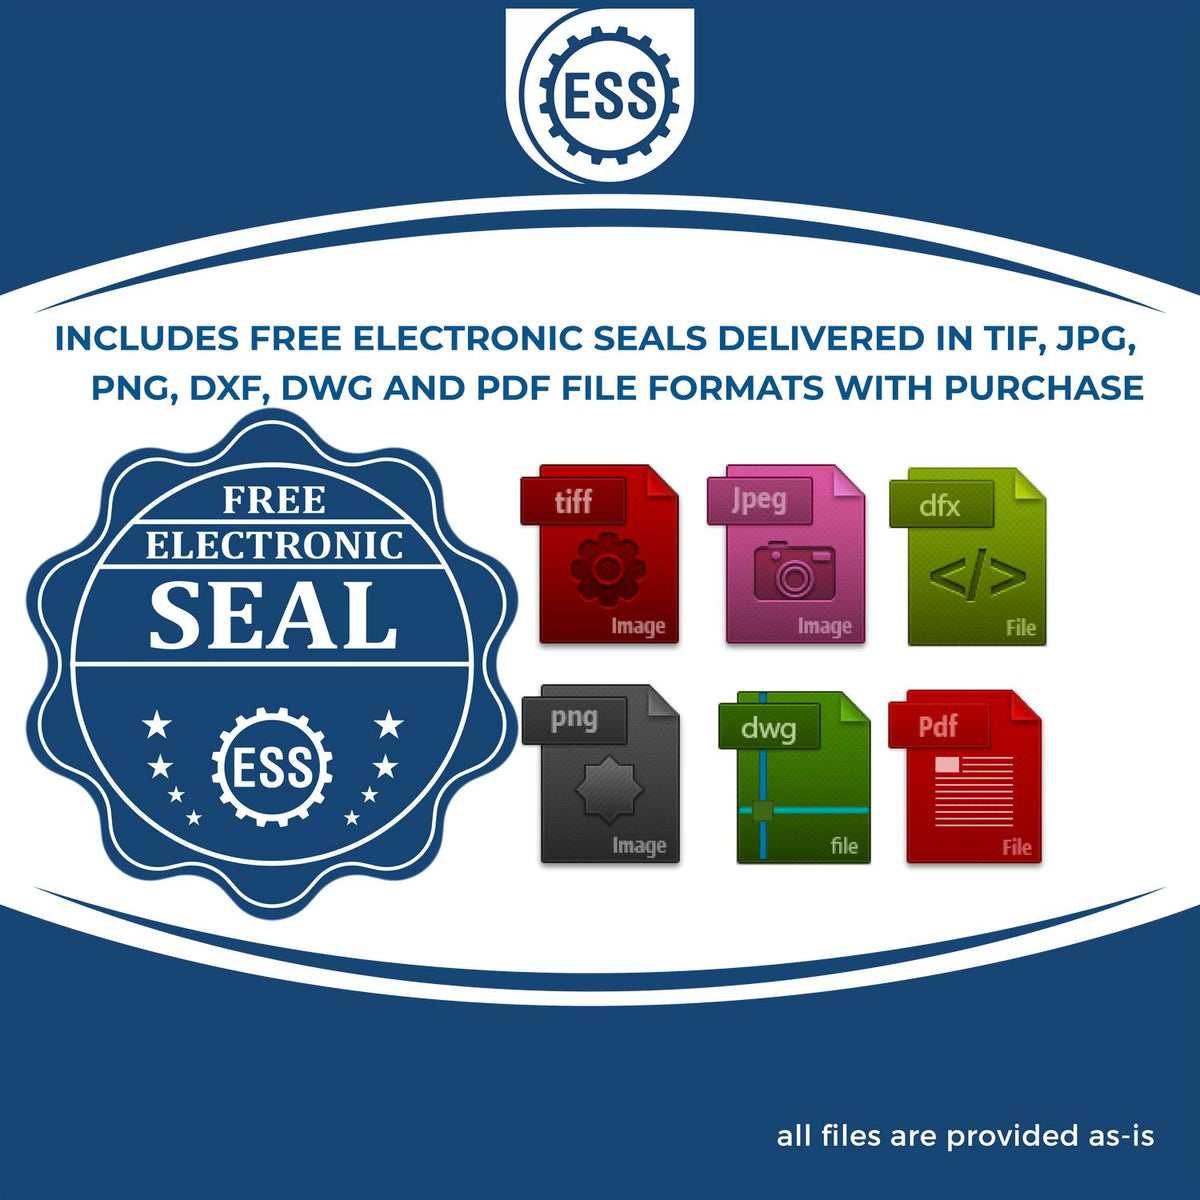 An infographic for the free electronic seal for the Louisiana Desk Surveyor Seal Embosser illustrating the different file type icons such as DXF, DWG, TIF, JPG and PNG.